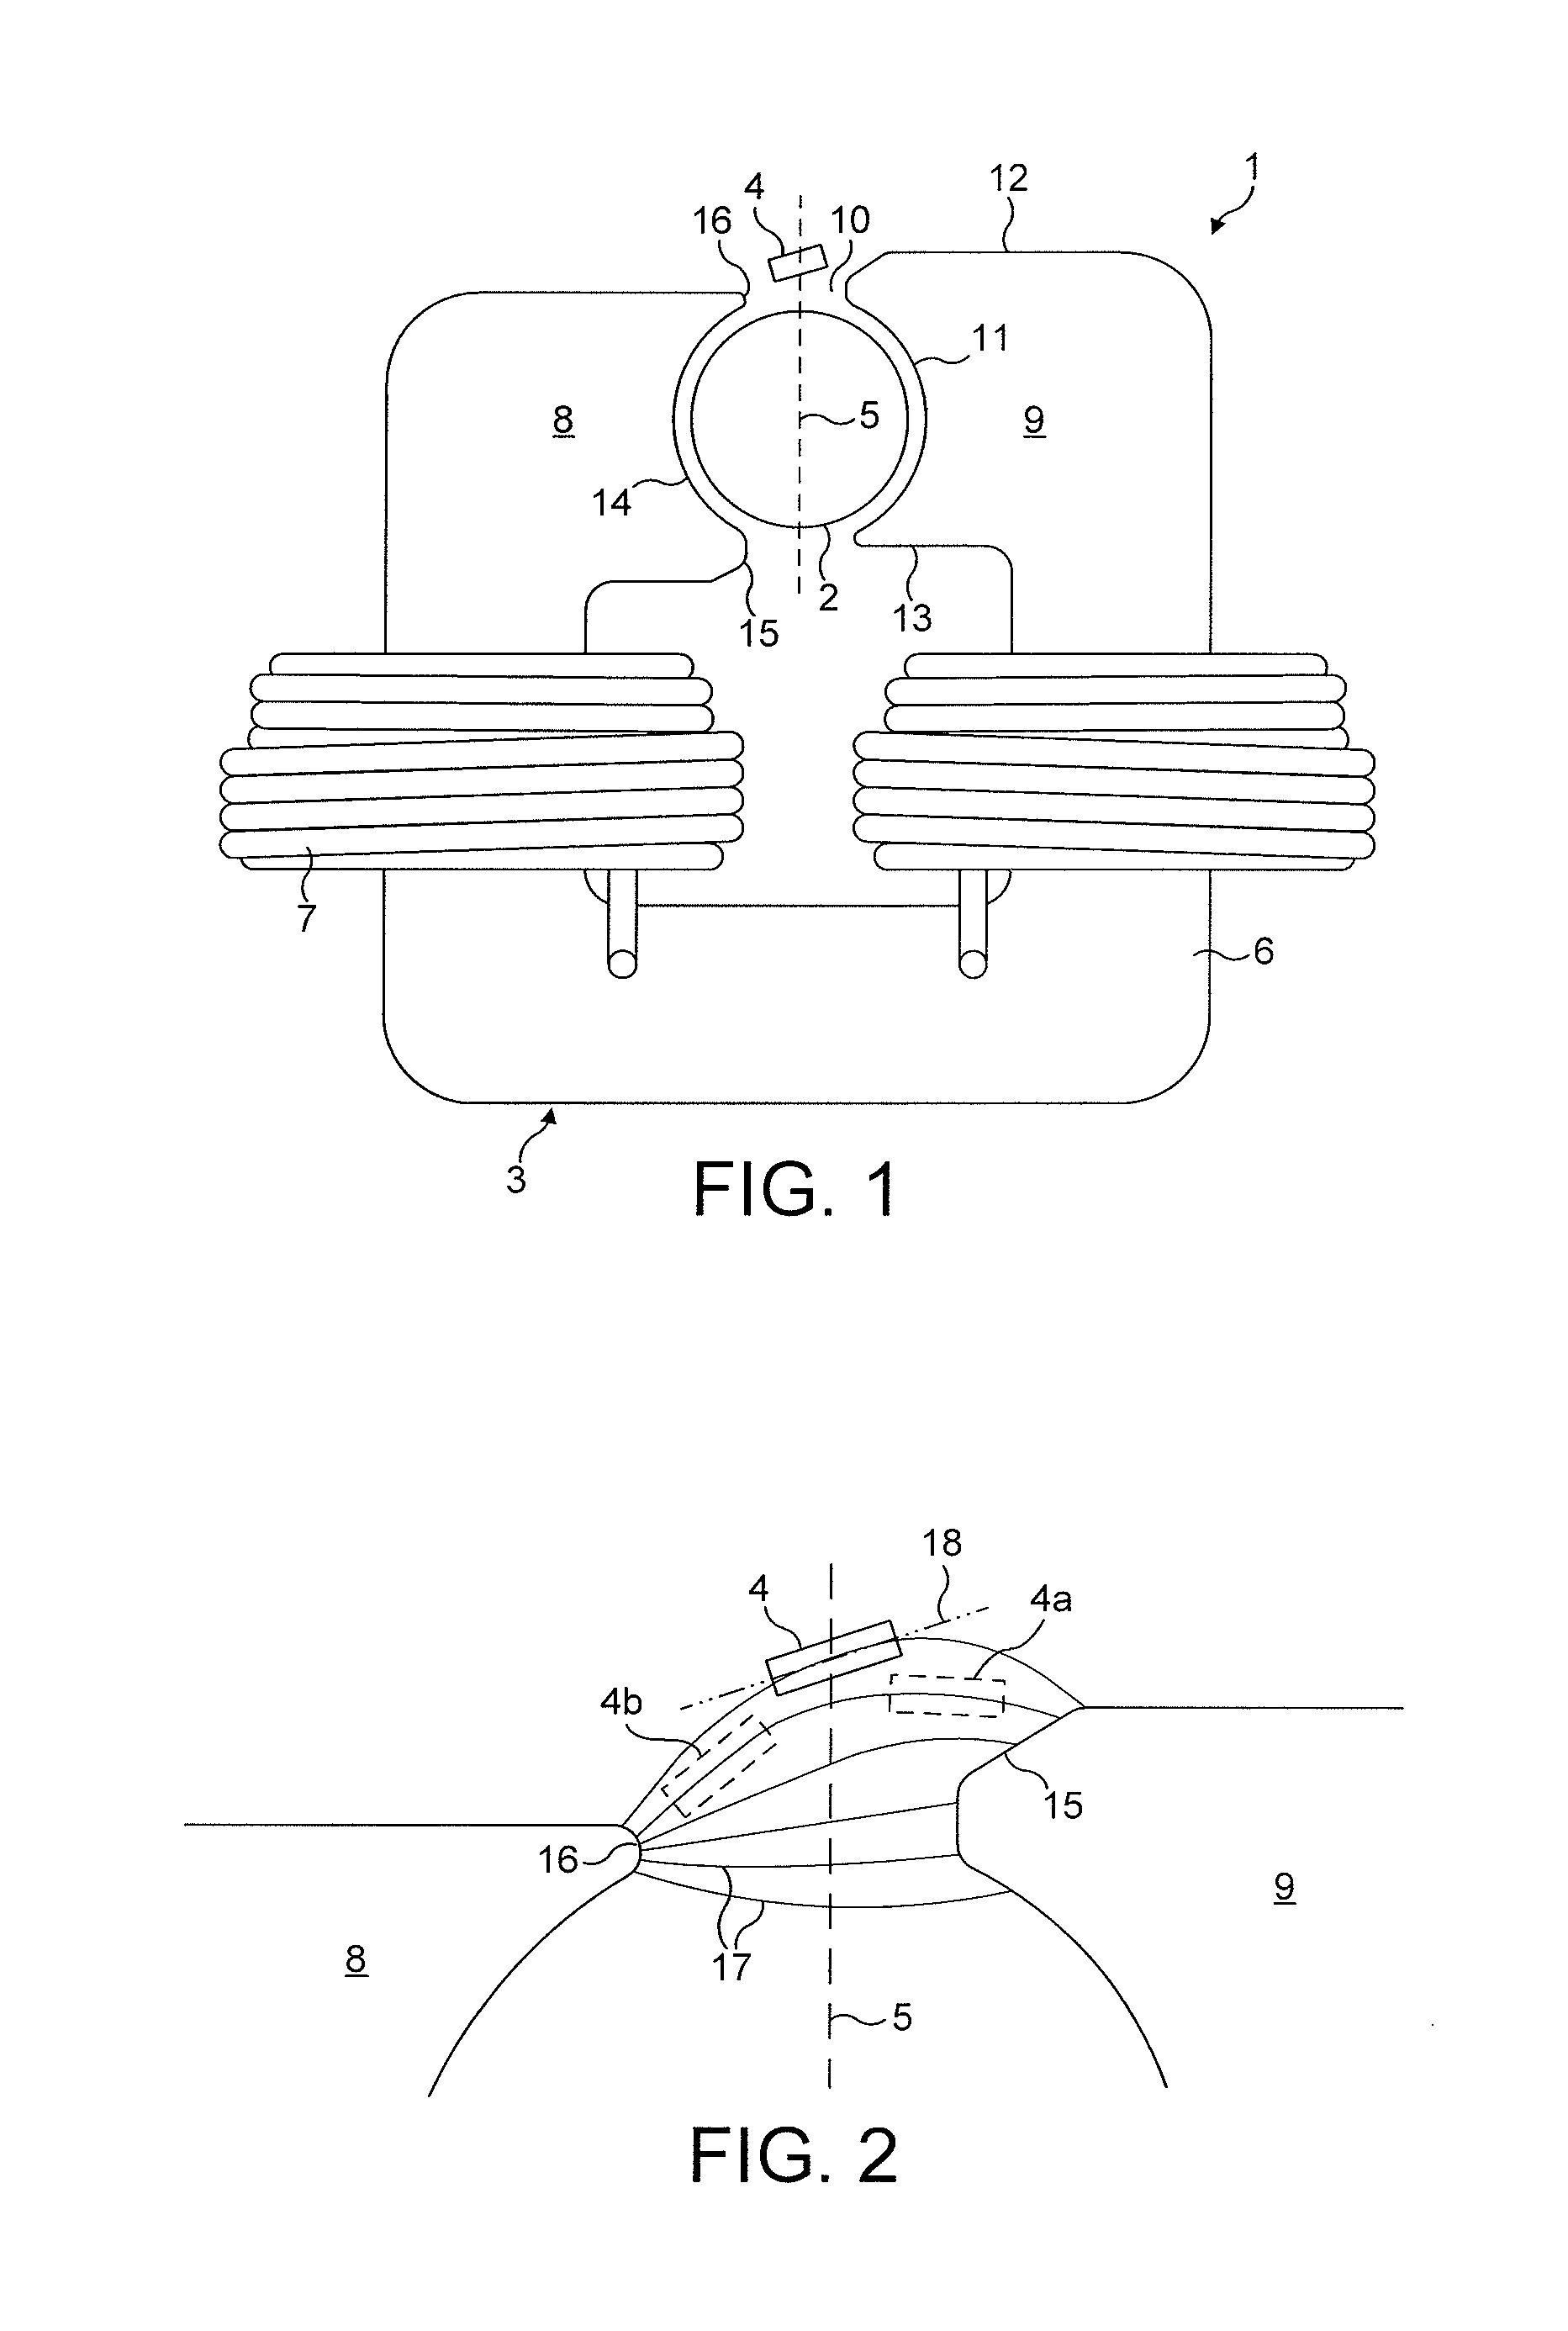 Stator with asymmetric poles and sensor oriented to more accurately determine position of rotor